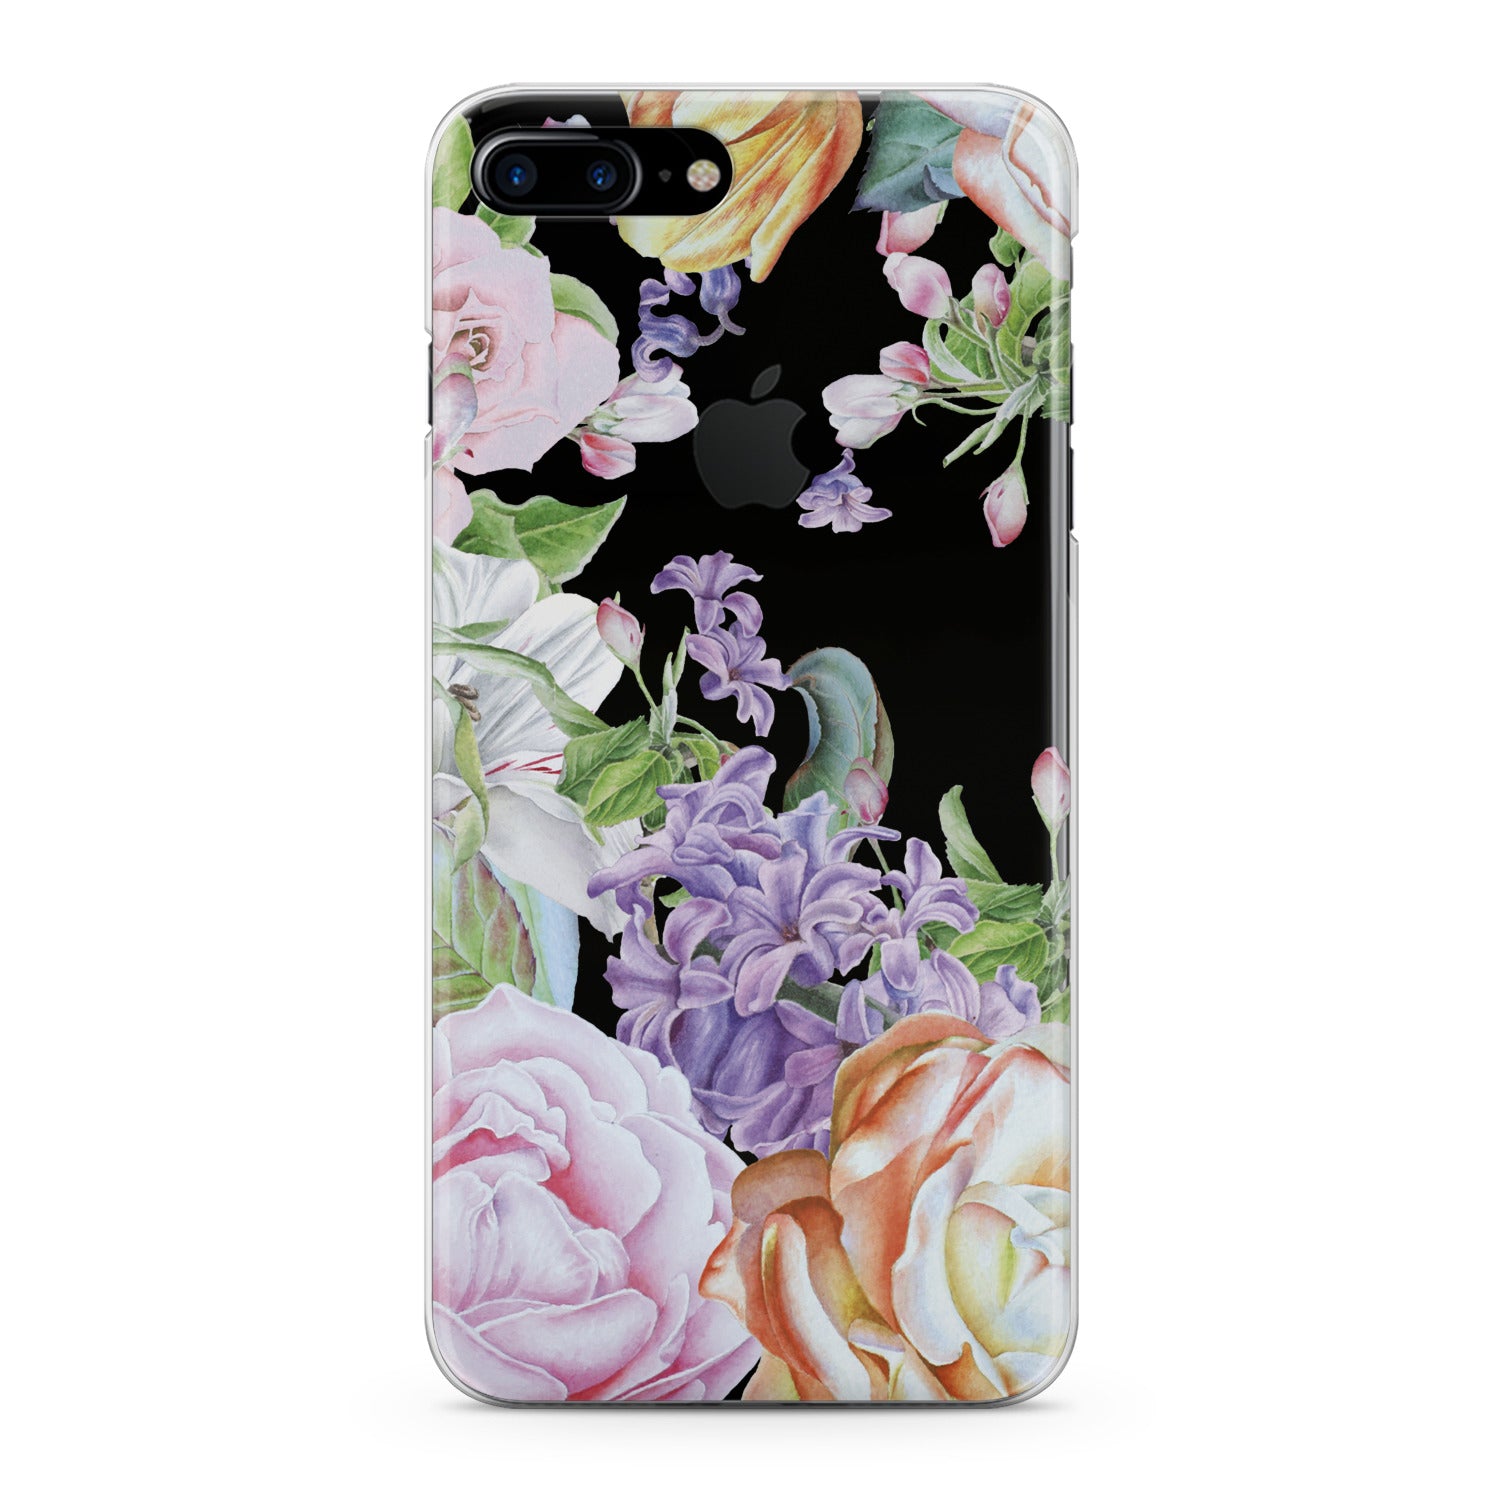 Lex Altern Awesome Garden Blossom Phone Case for your iPhone & Android phone.